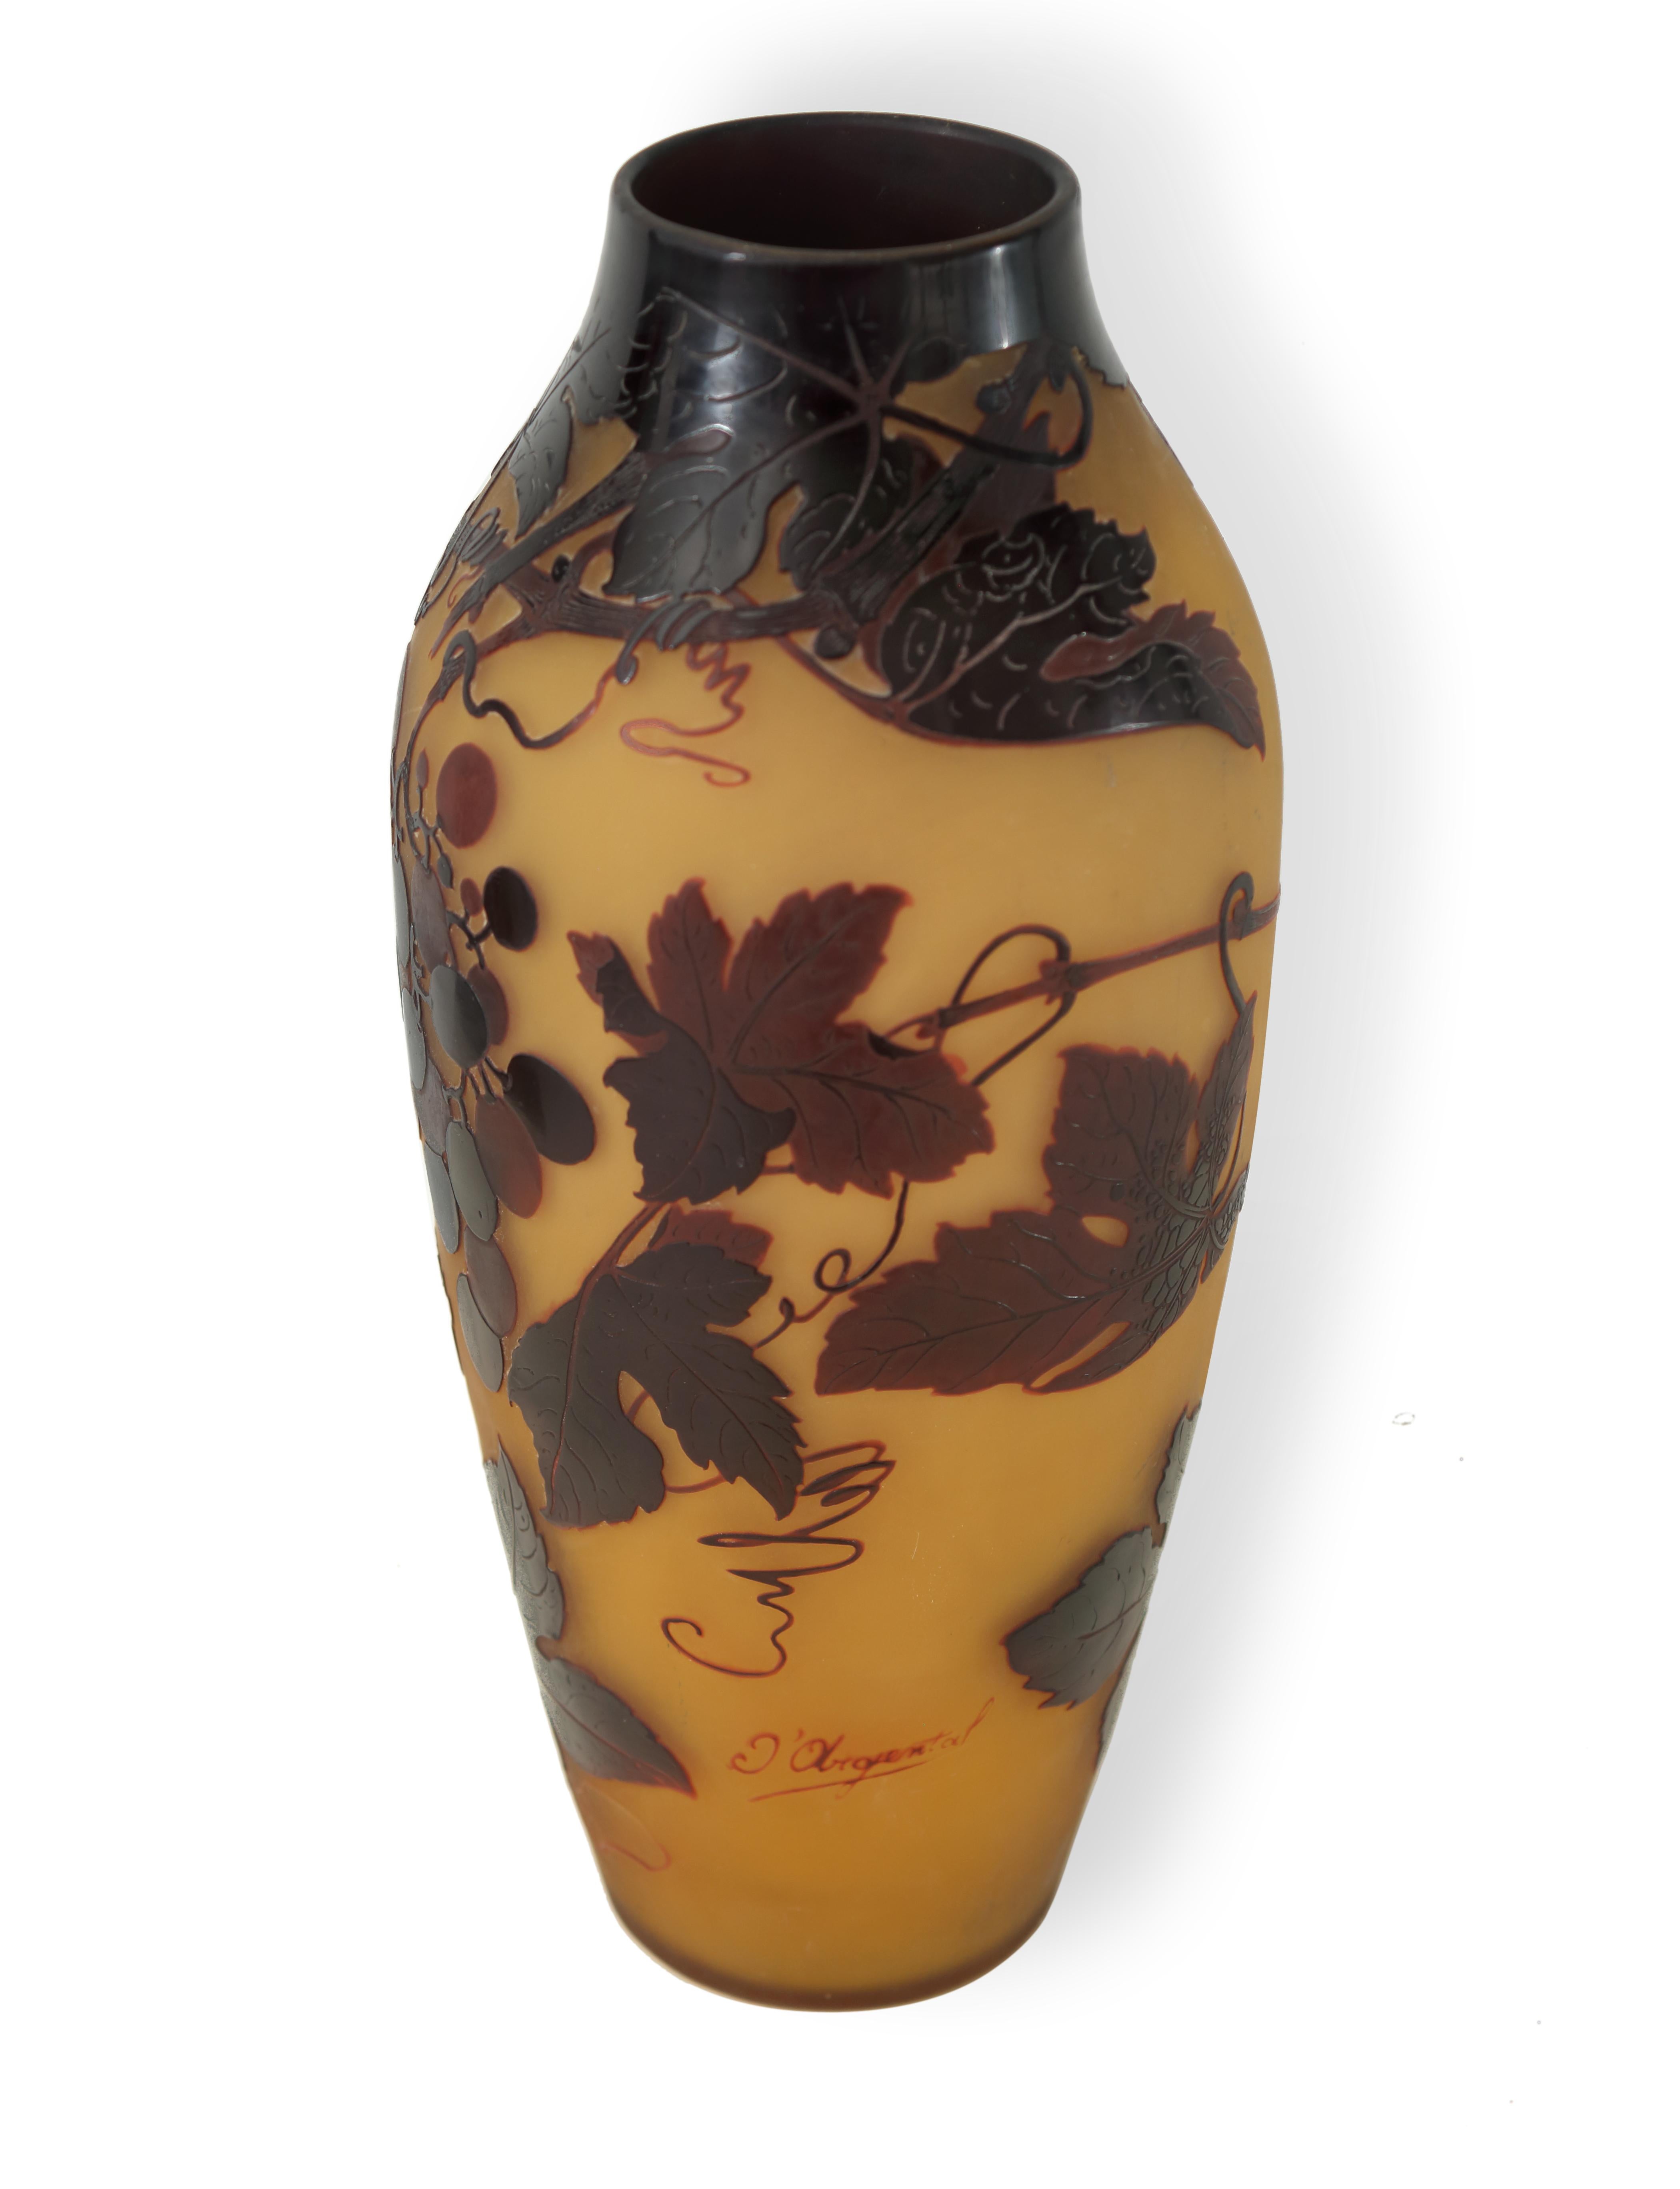 A monumental acid-etched cameo Art Noveau red and yellow art glass scenic vase. Beautiful Art Deco-Art Nouveau decorative vase. Condition is good, with wear commensurate with age and use.